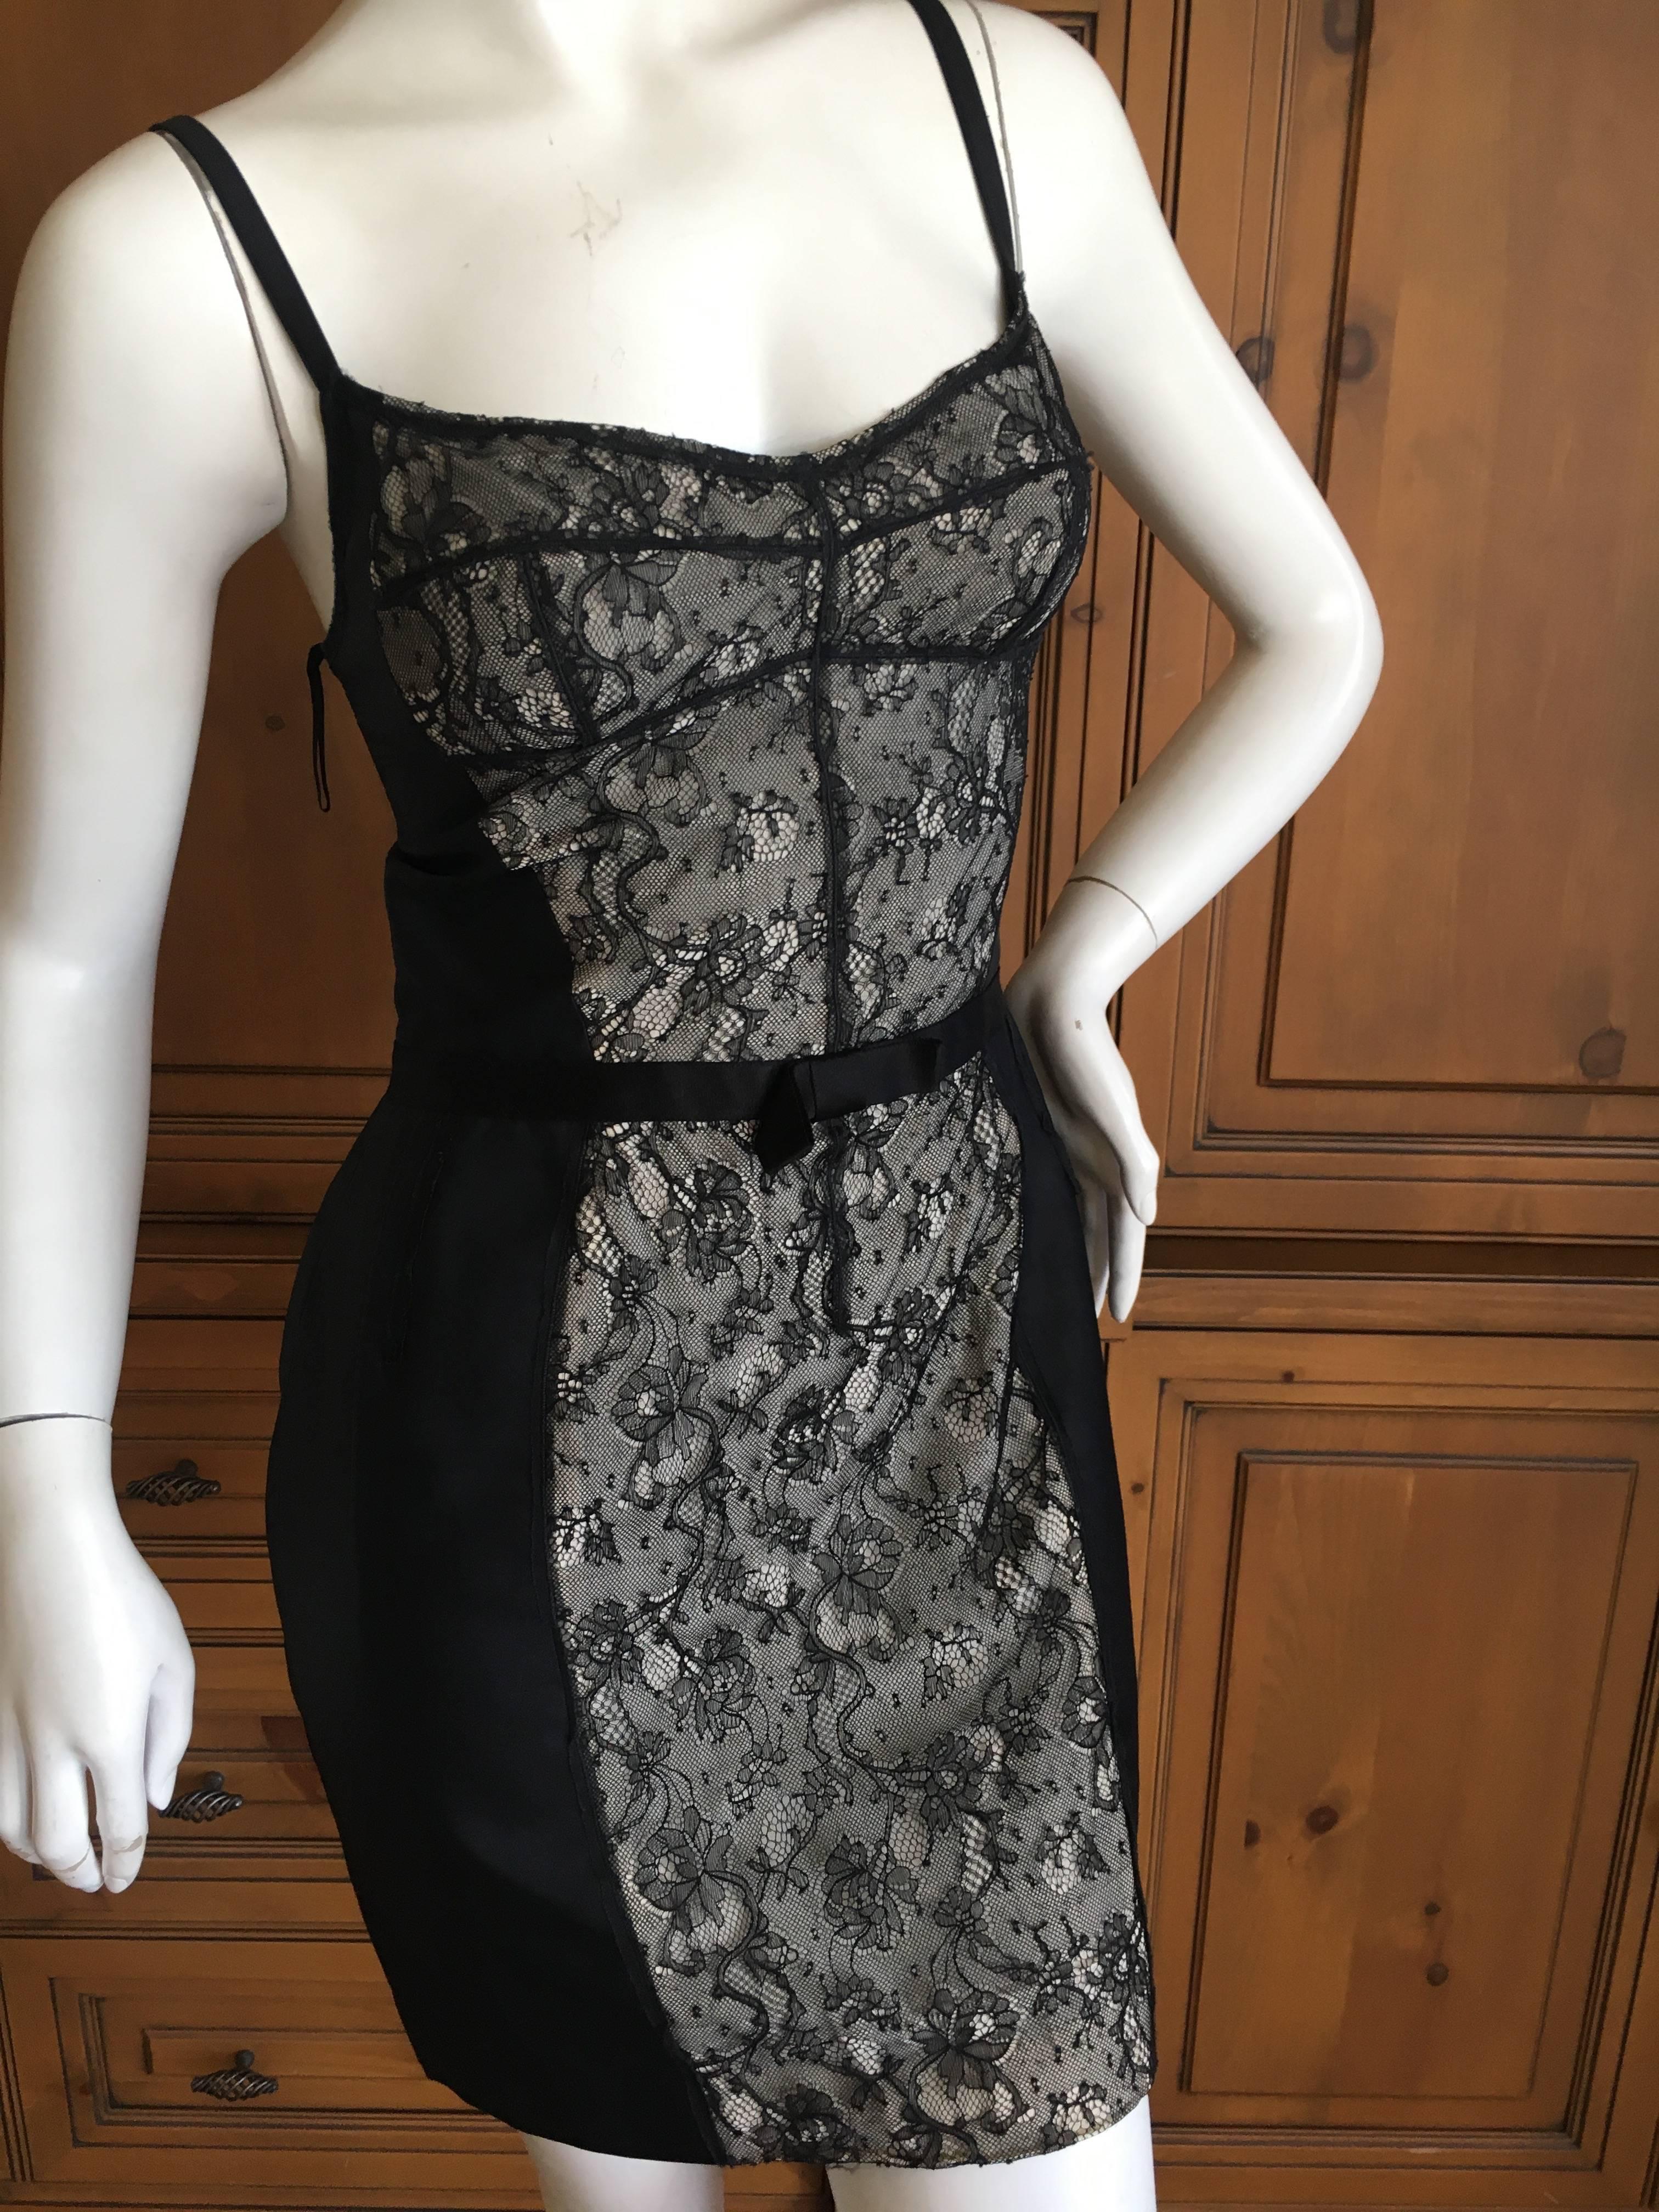 Charming lace front gray cocktail dress from D&G Dolce & Gabbana .
There is a lot of stretch in this.
Size 38
Bust 34